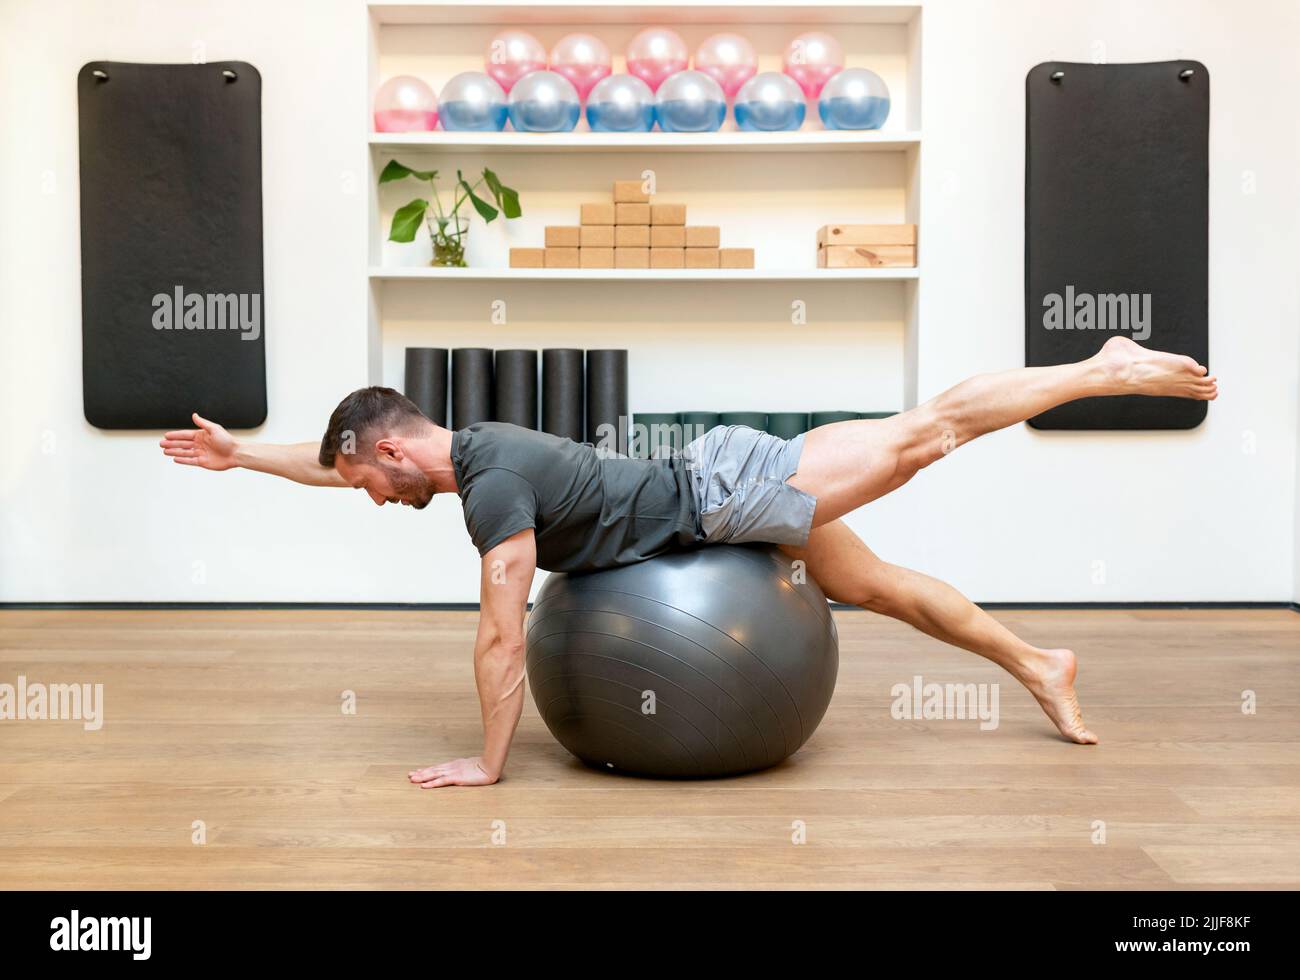 Fit man doing diagonal stabilization exercises on a Pilates ball in a gym in a healthy active lifestyle concept Stock Photo